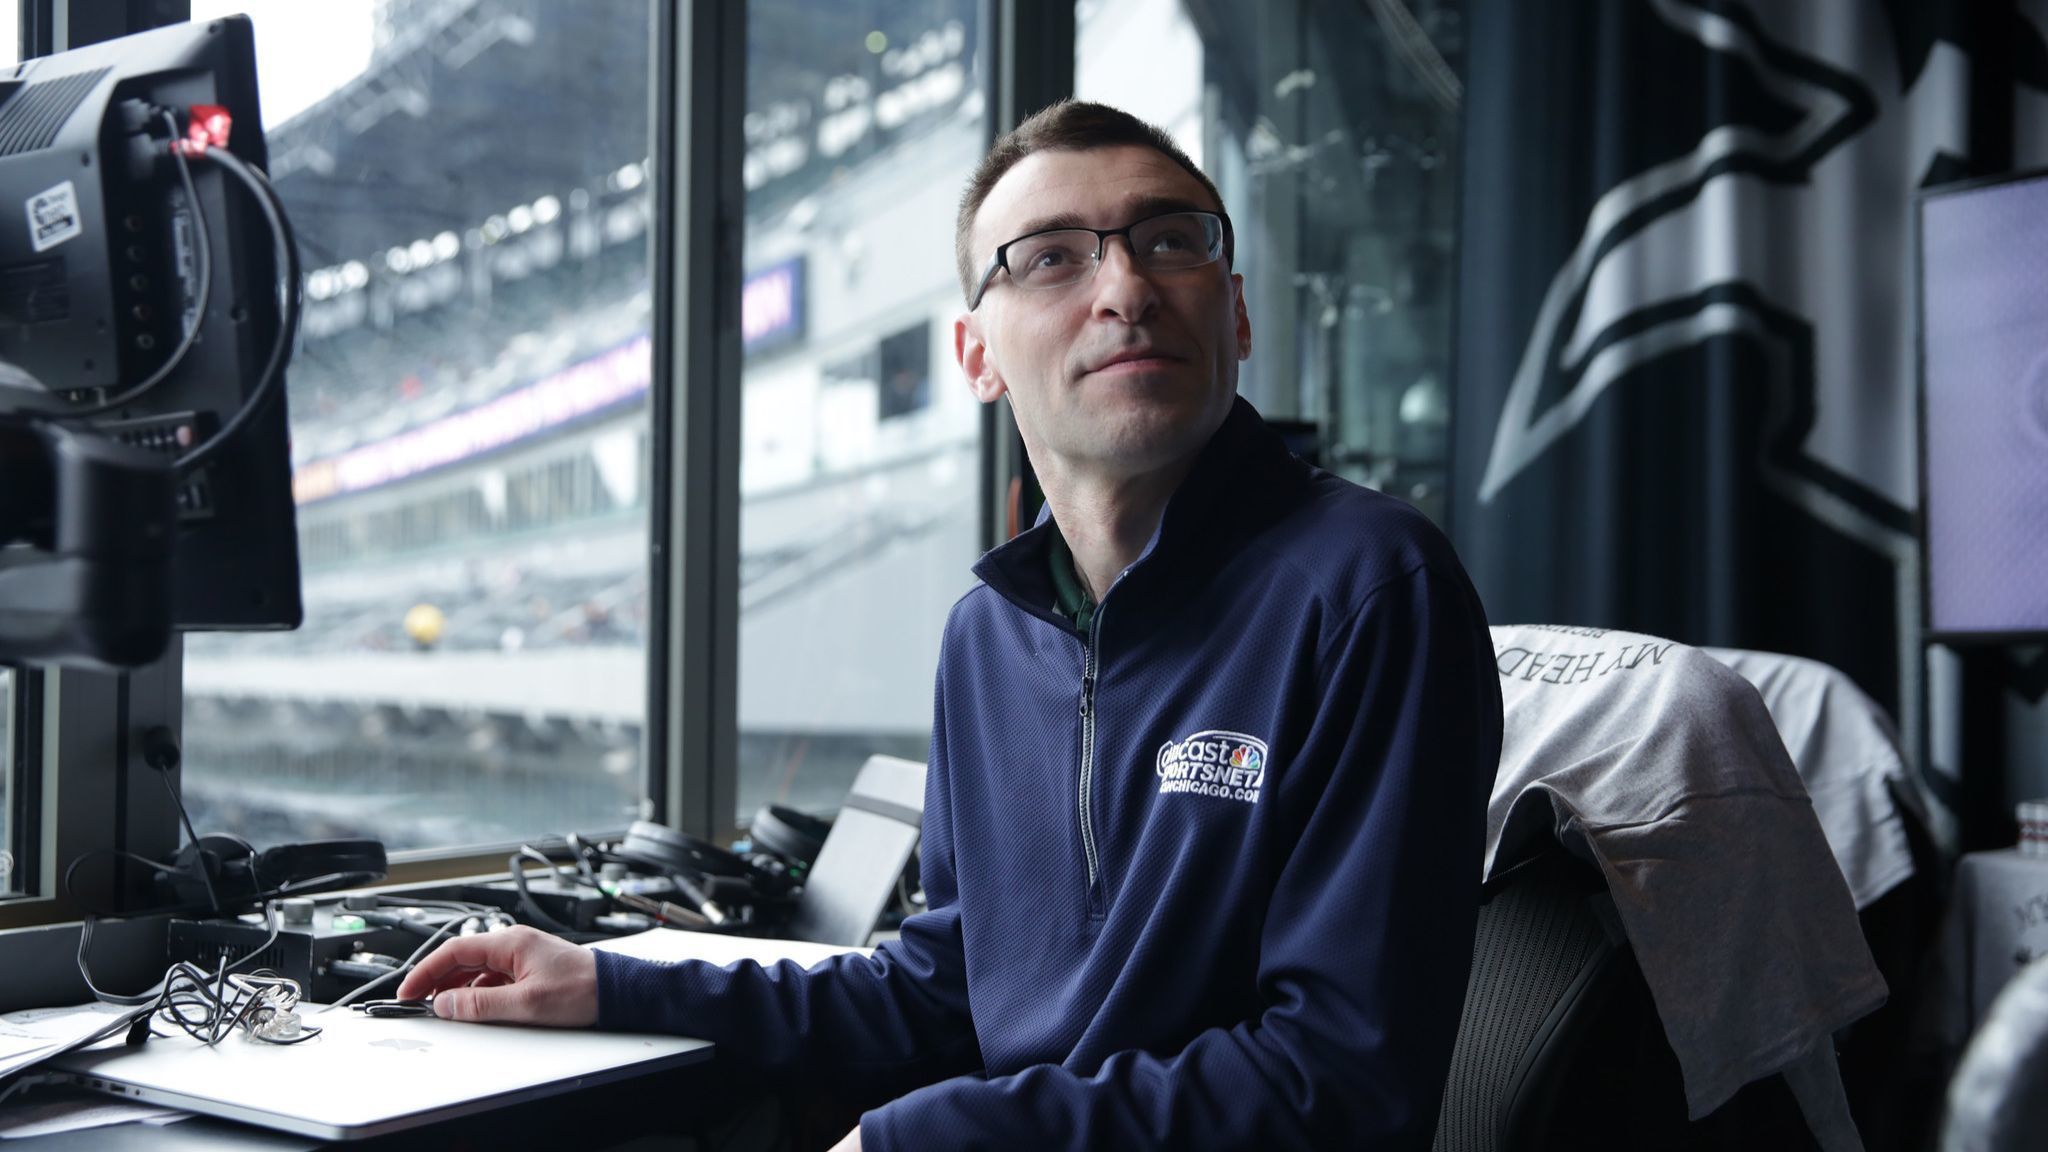 White Sox TV team welcomes Jason Benetti (JD '11) to crew, News & Events